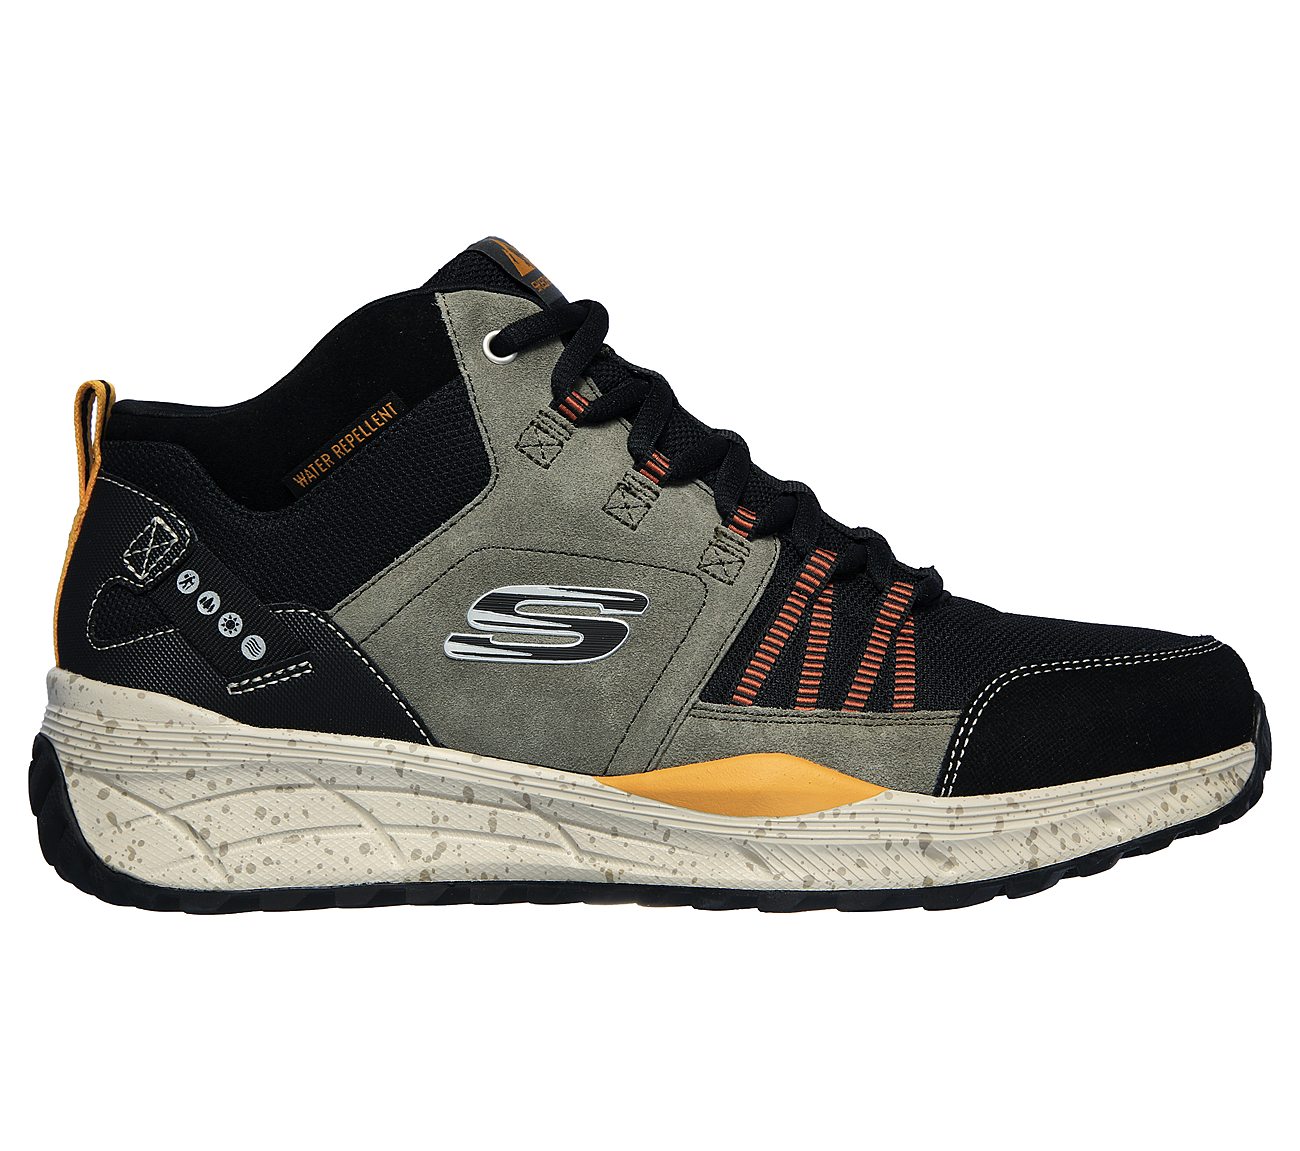 EQUALIZER 4.0 TRAIL -, OLIVE/BLACK Footwear Lateral View